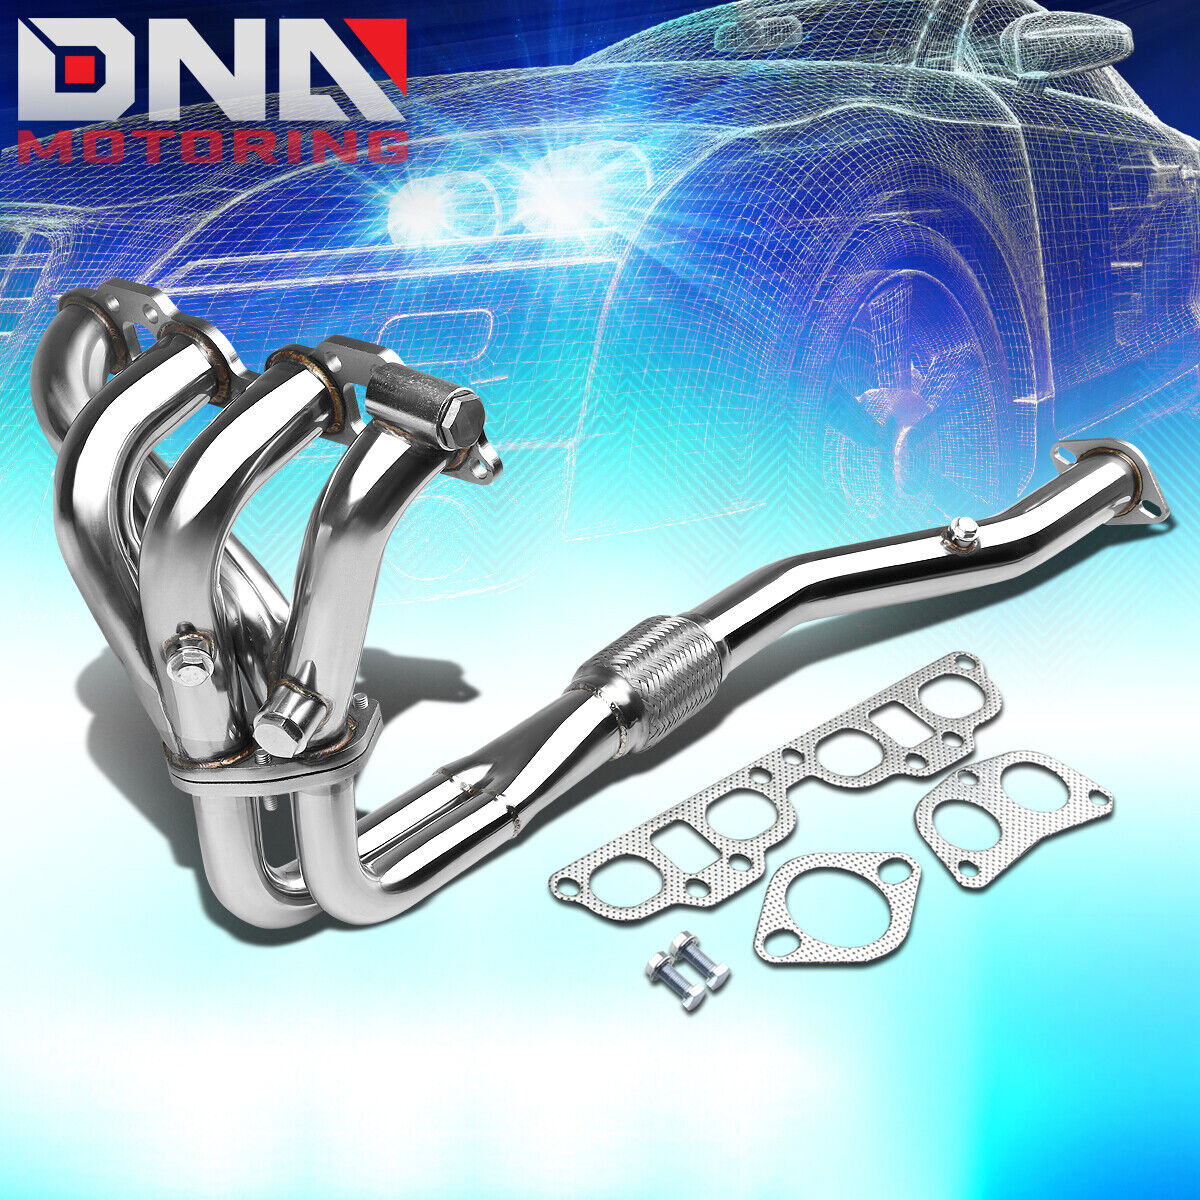 STAINLESS STEEL 4-2-1 HEADER FOR 91-01 G20/SENTRA/200SX 2.0L l4 EXHAUST/MANIFOLD